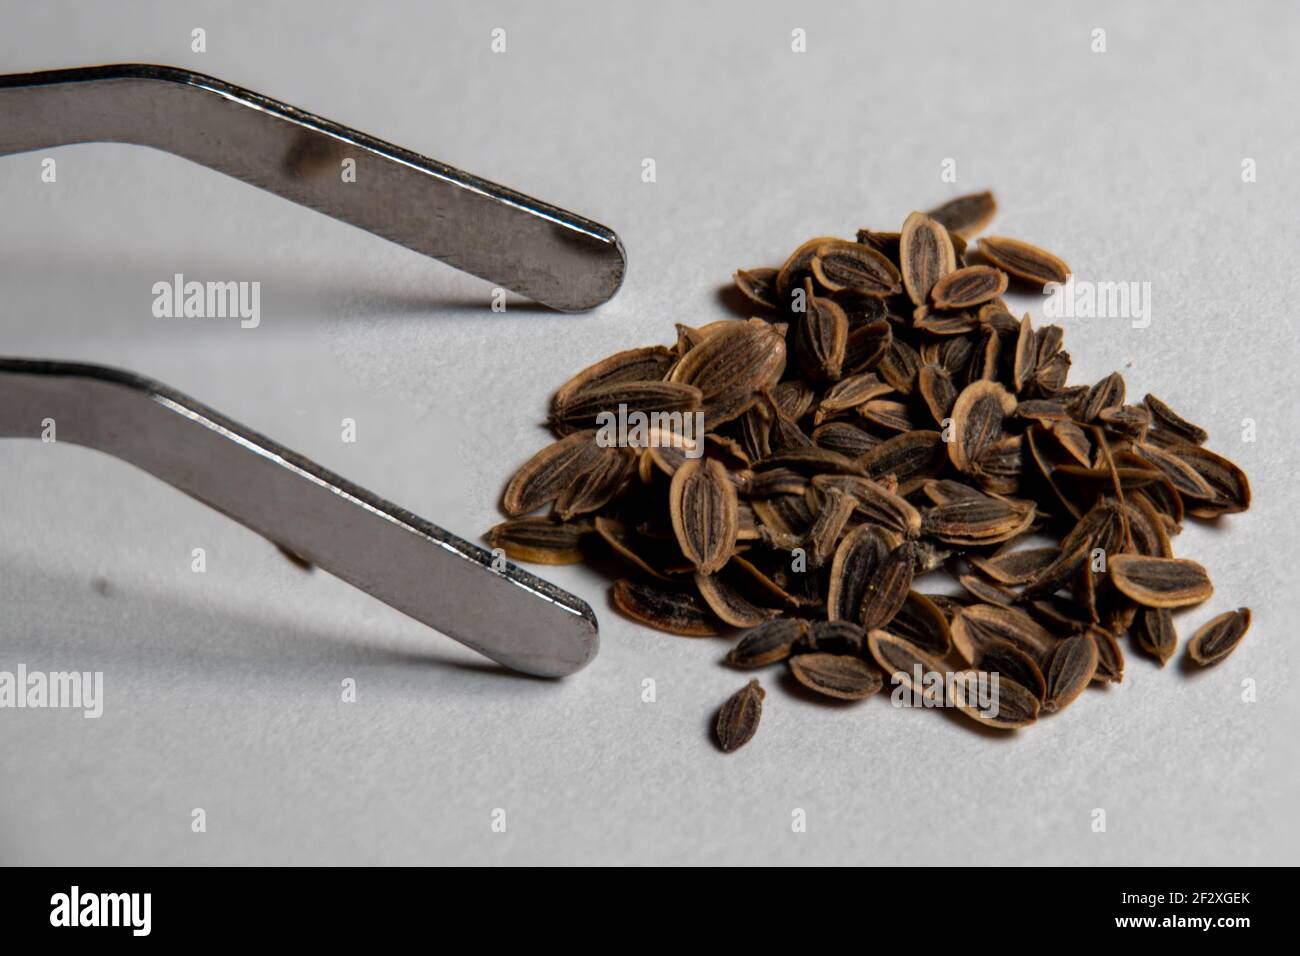 Macro image of stainless steel tweezers next to dry Dill (Anethum graveolens) seeds an annual herb in the celery family Apiaceae Stock Photo